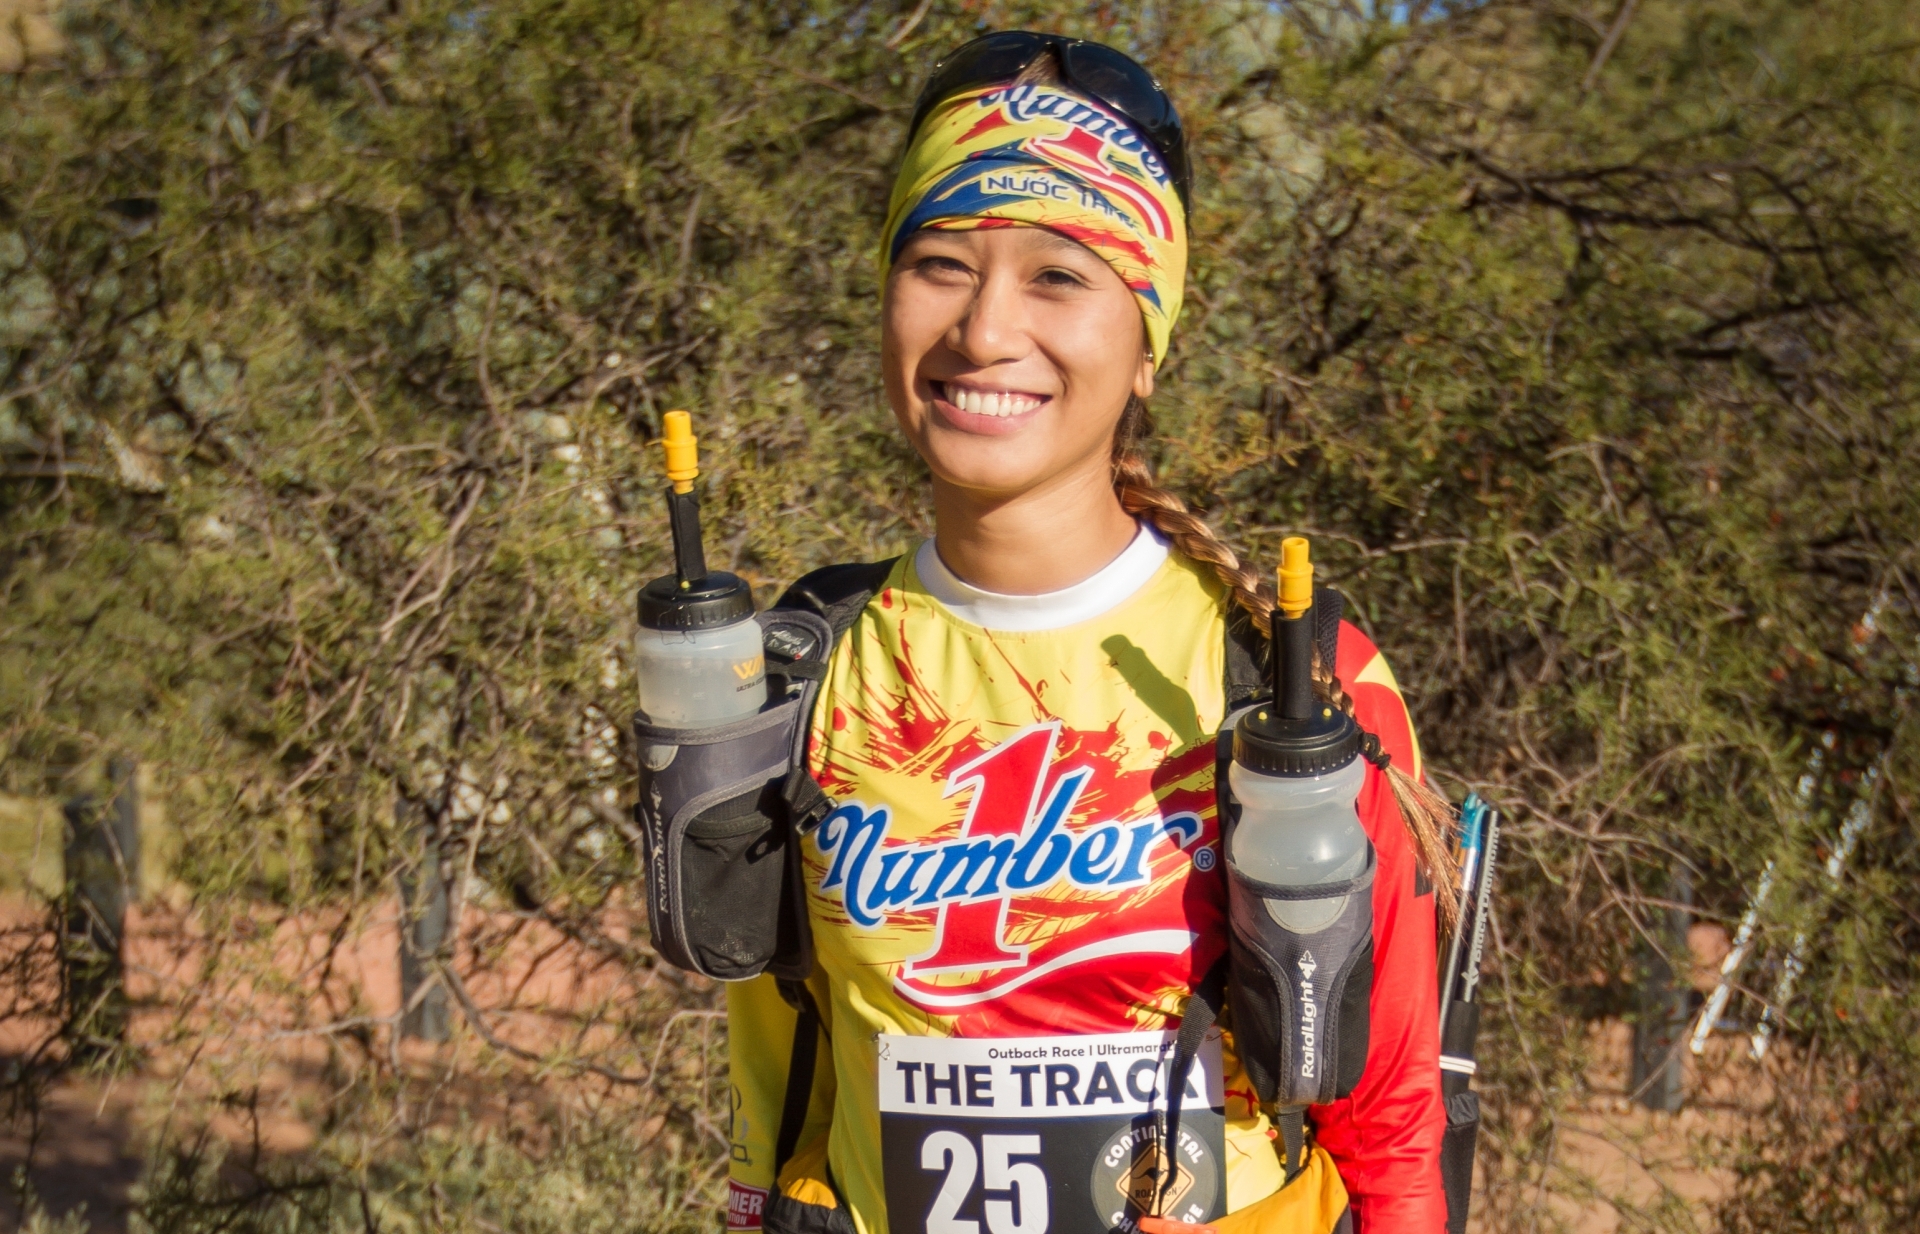 determination makes champions says young adventurer vu phuong thanh